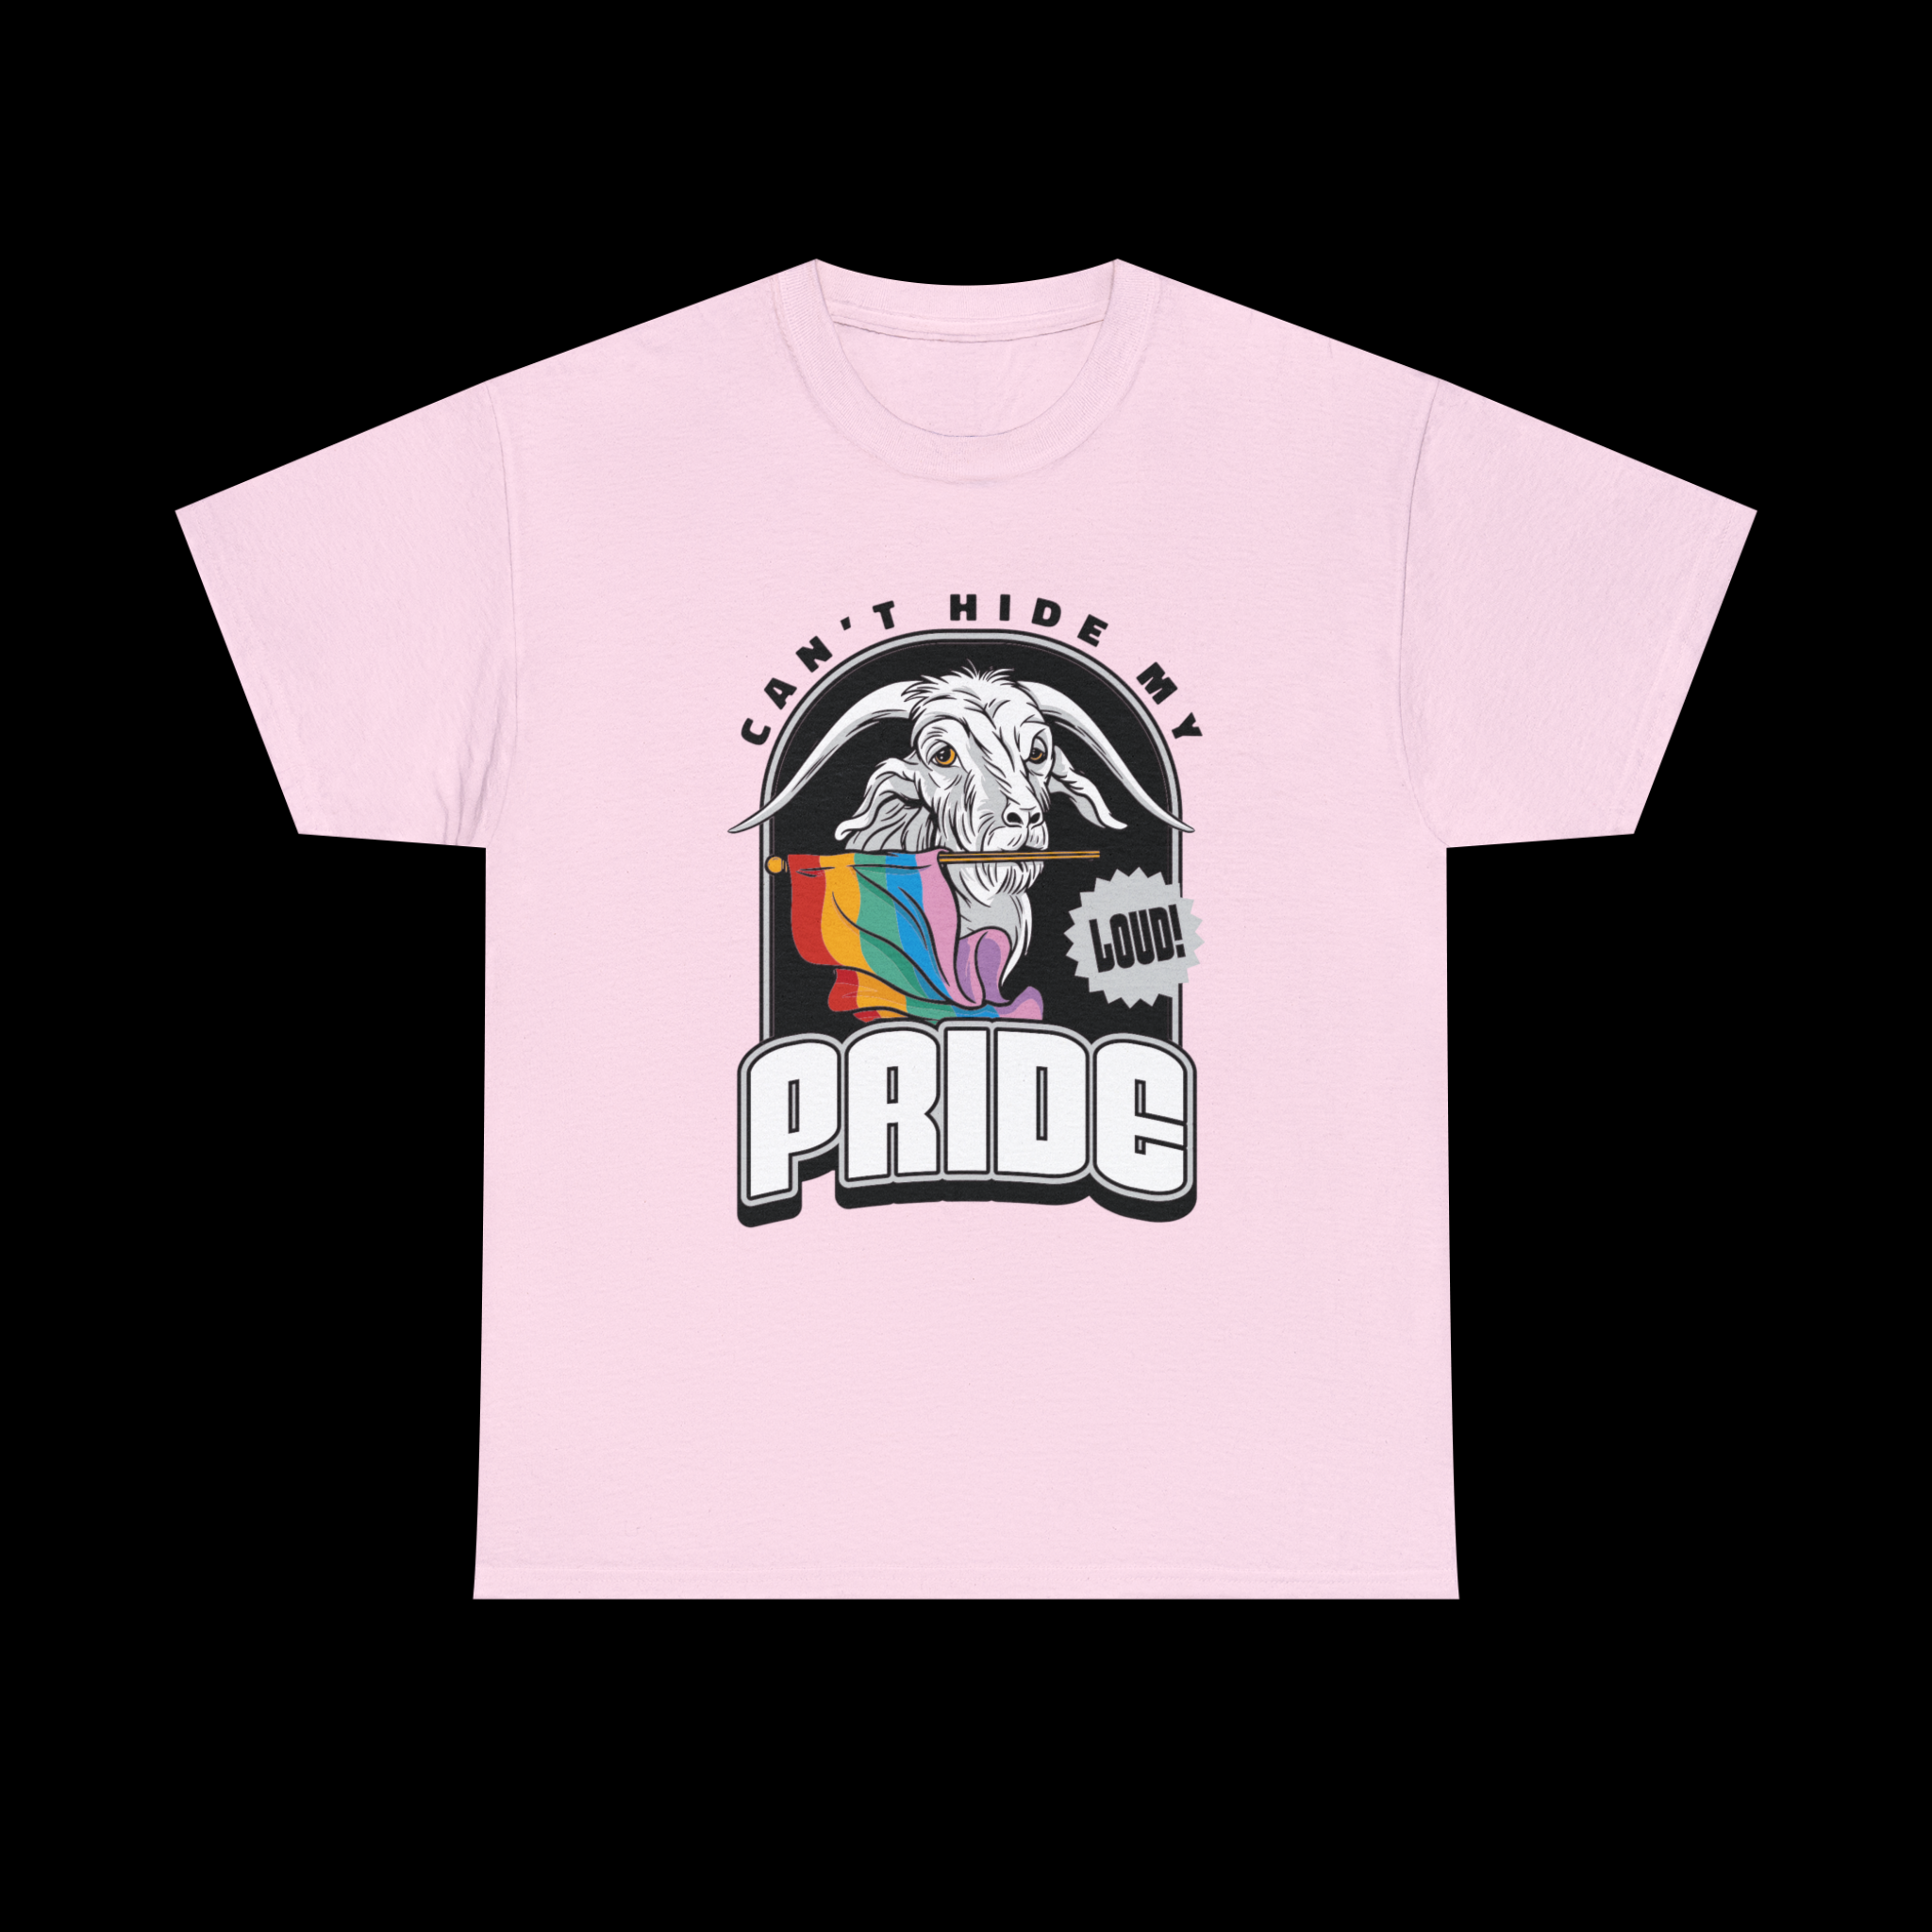 A Can't Hide My Pride t-shirt by Printify with an image of a unicorn and a rainbow.